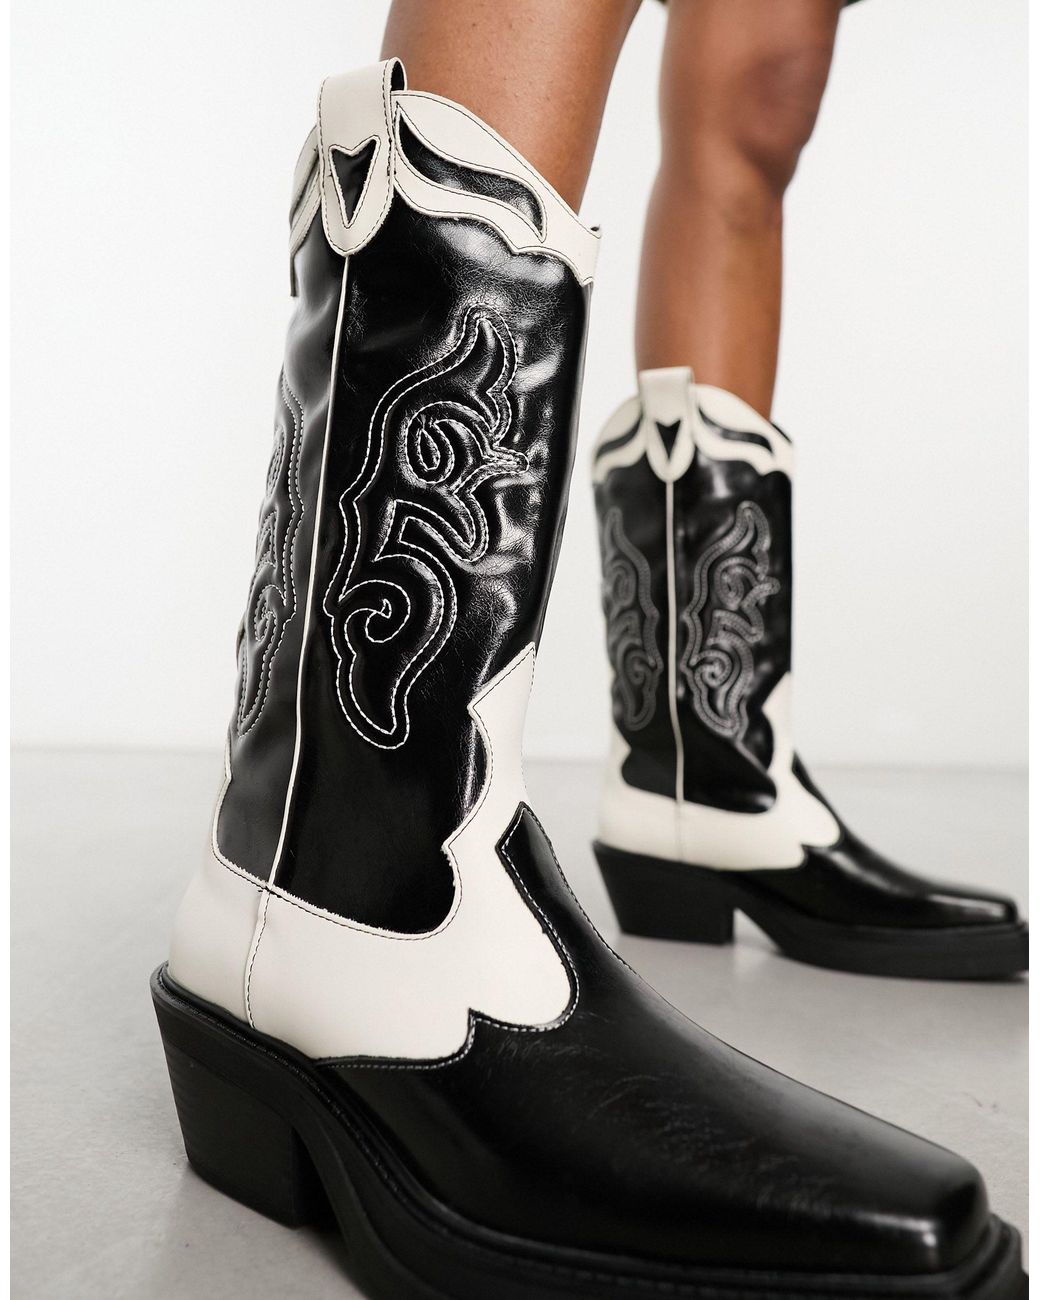 Contrast Panel Detail Western Cowboy Boots